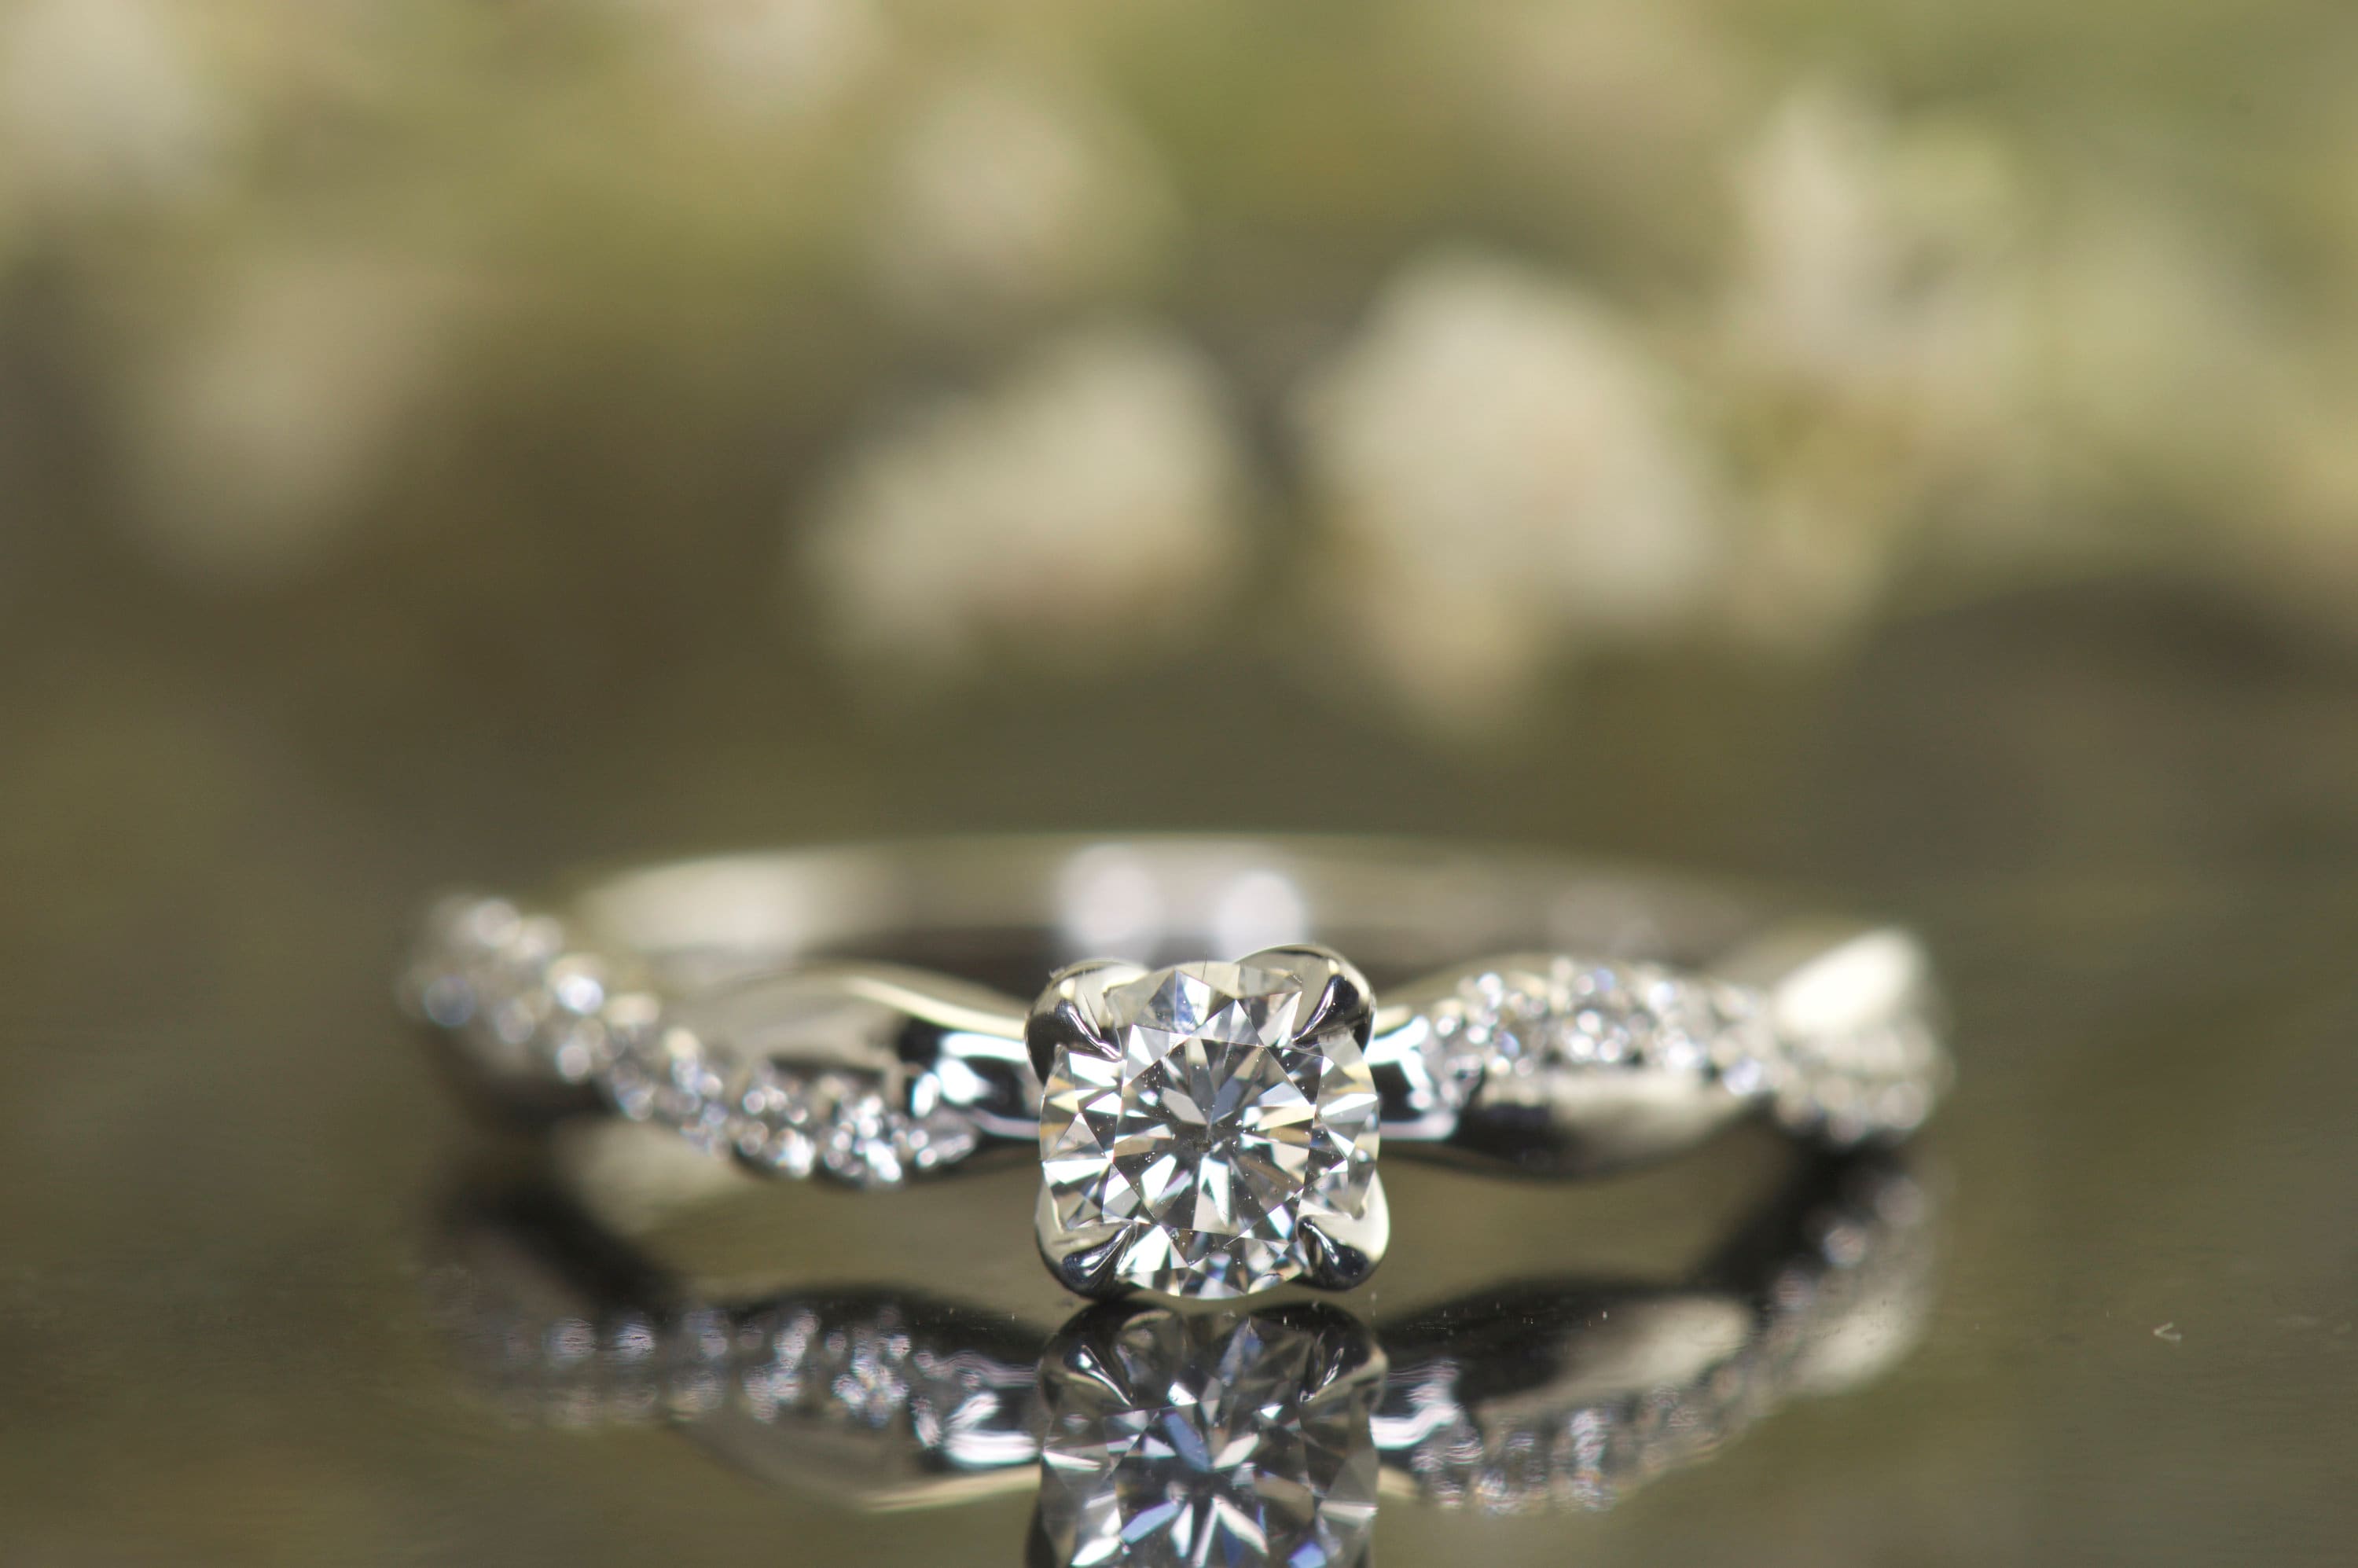 Unique Diamond Engagement Rings - Poetry of Luxe Jewelry